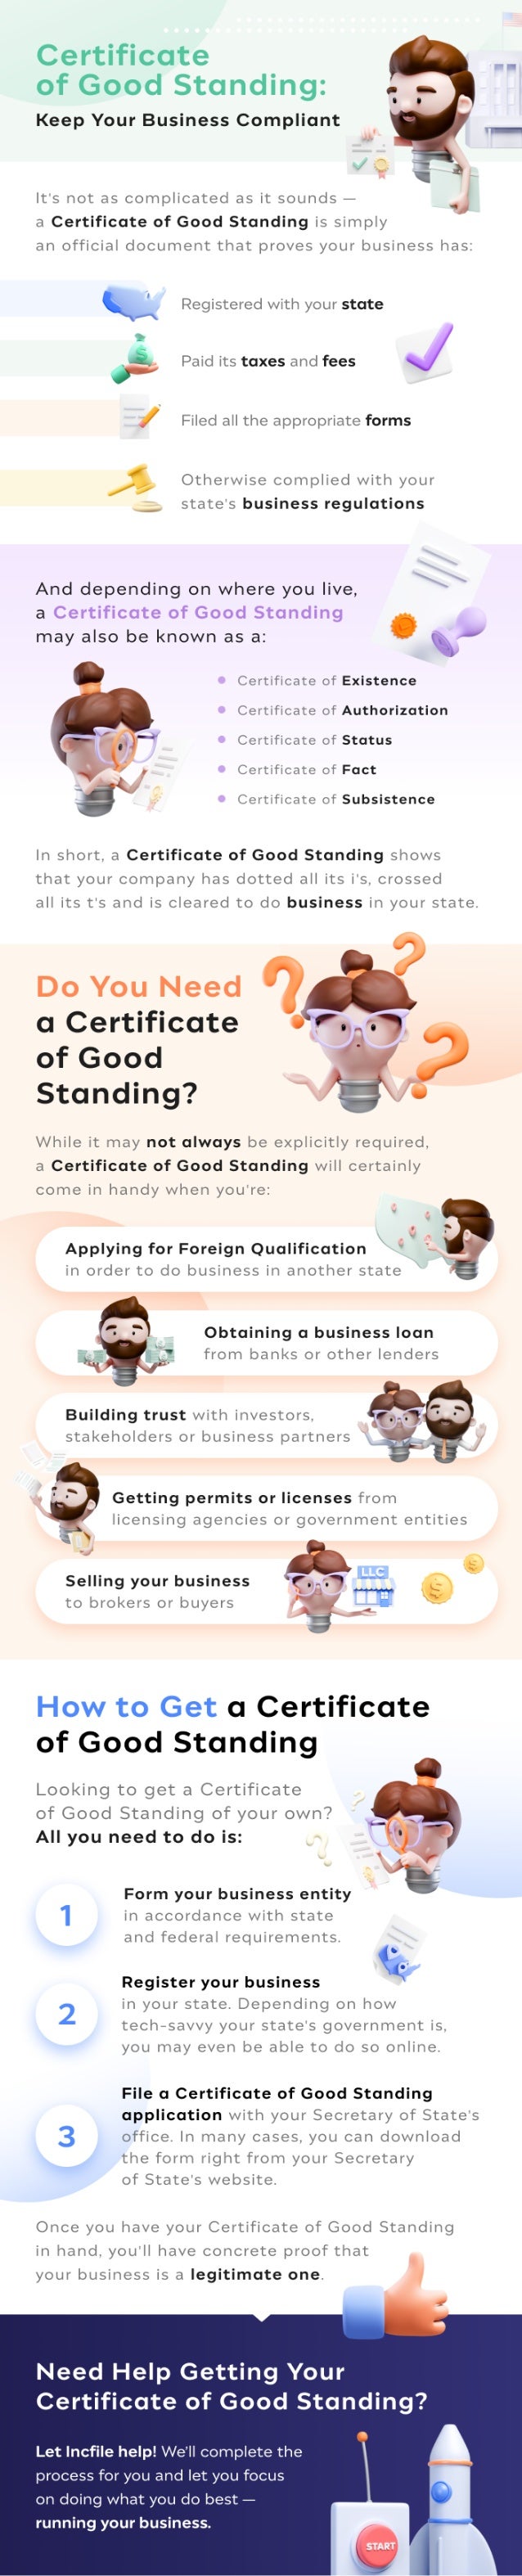 What Is a Certificate of Good Standing and Why Do You Need It?